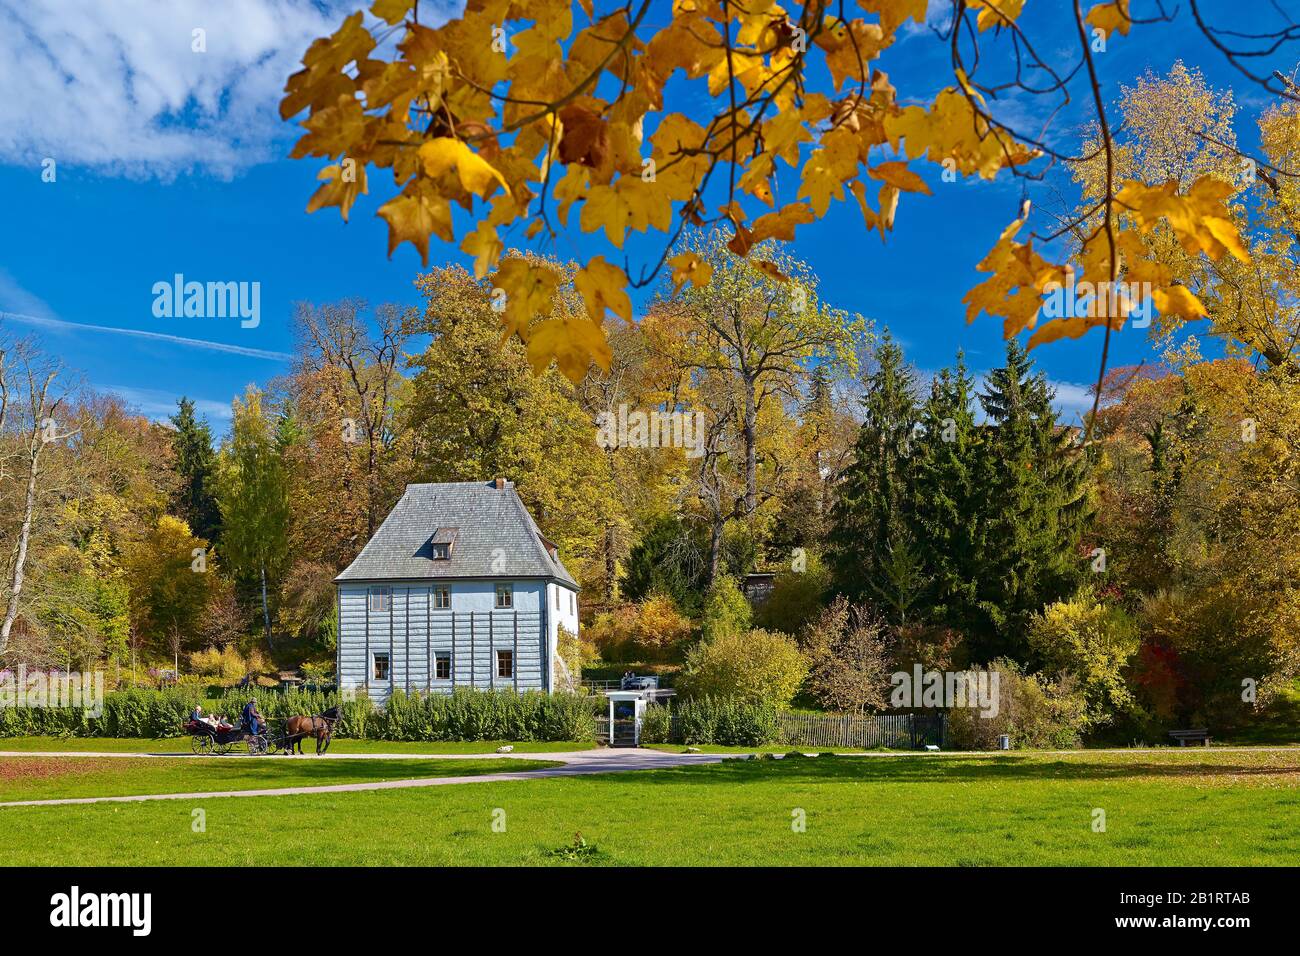 Goethe's garden house in the Park an der Ilm, Weimar, Thuringia, Germany Stock Photo